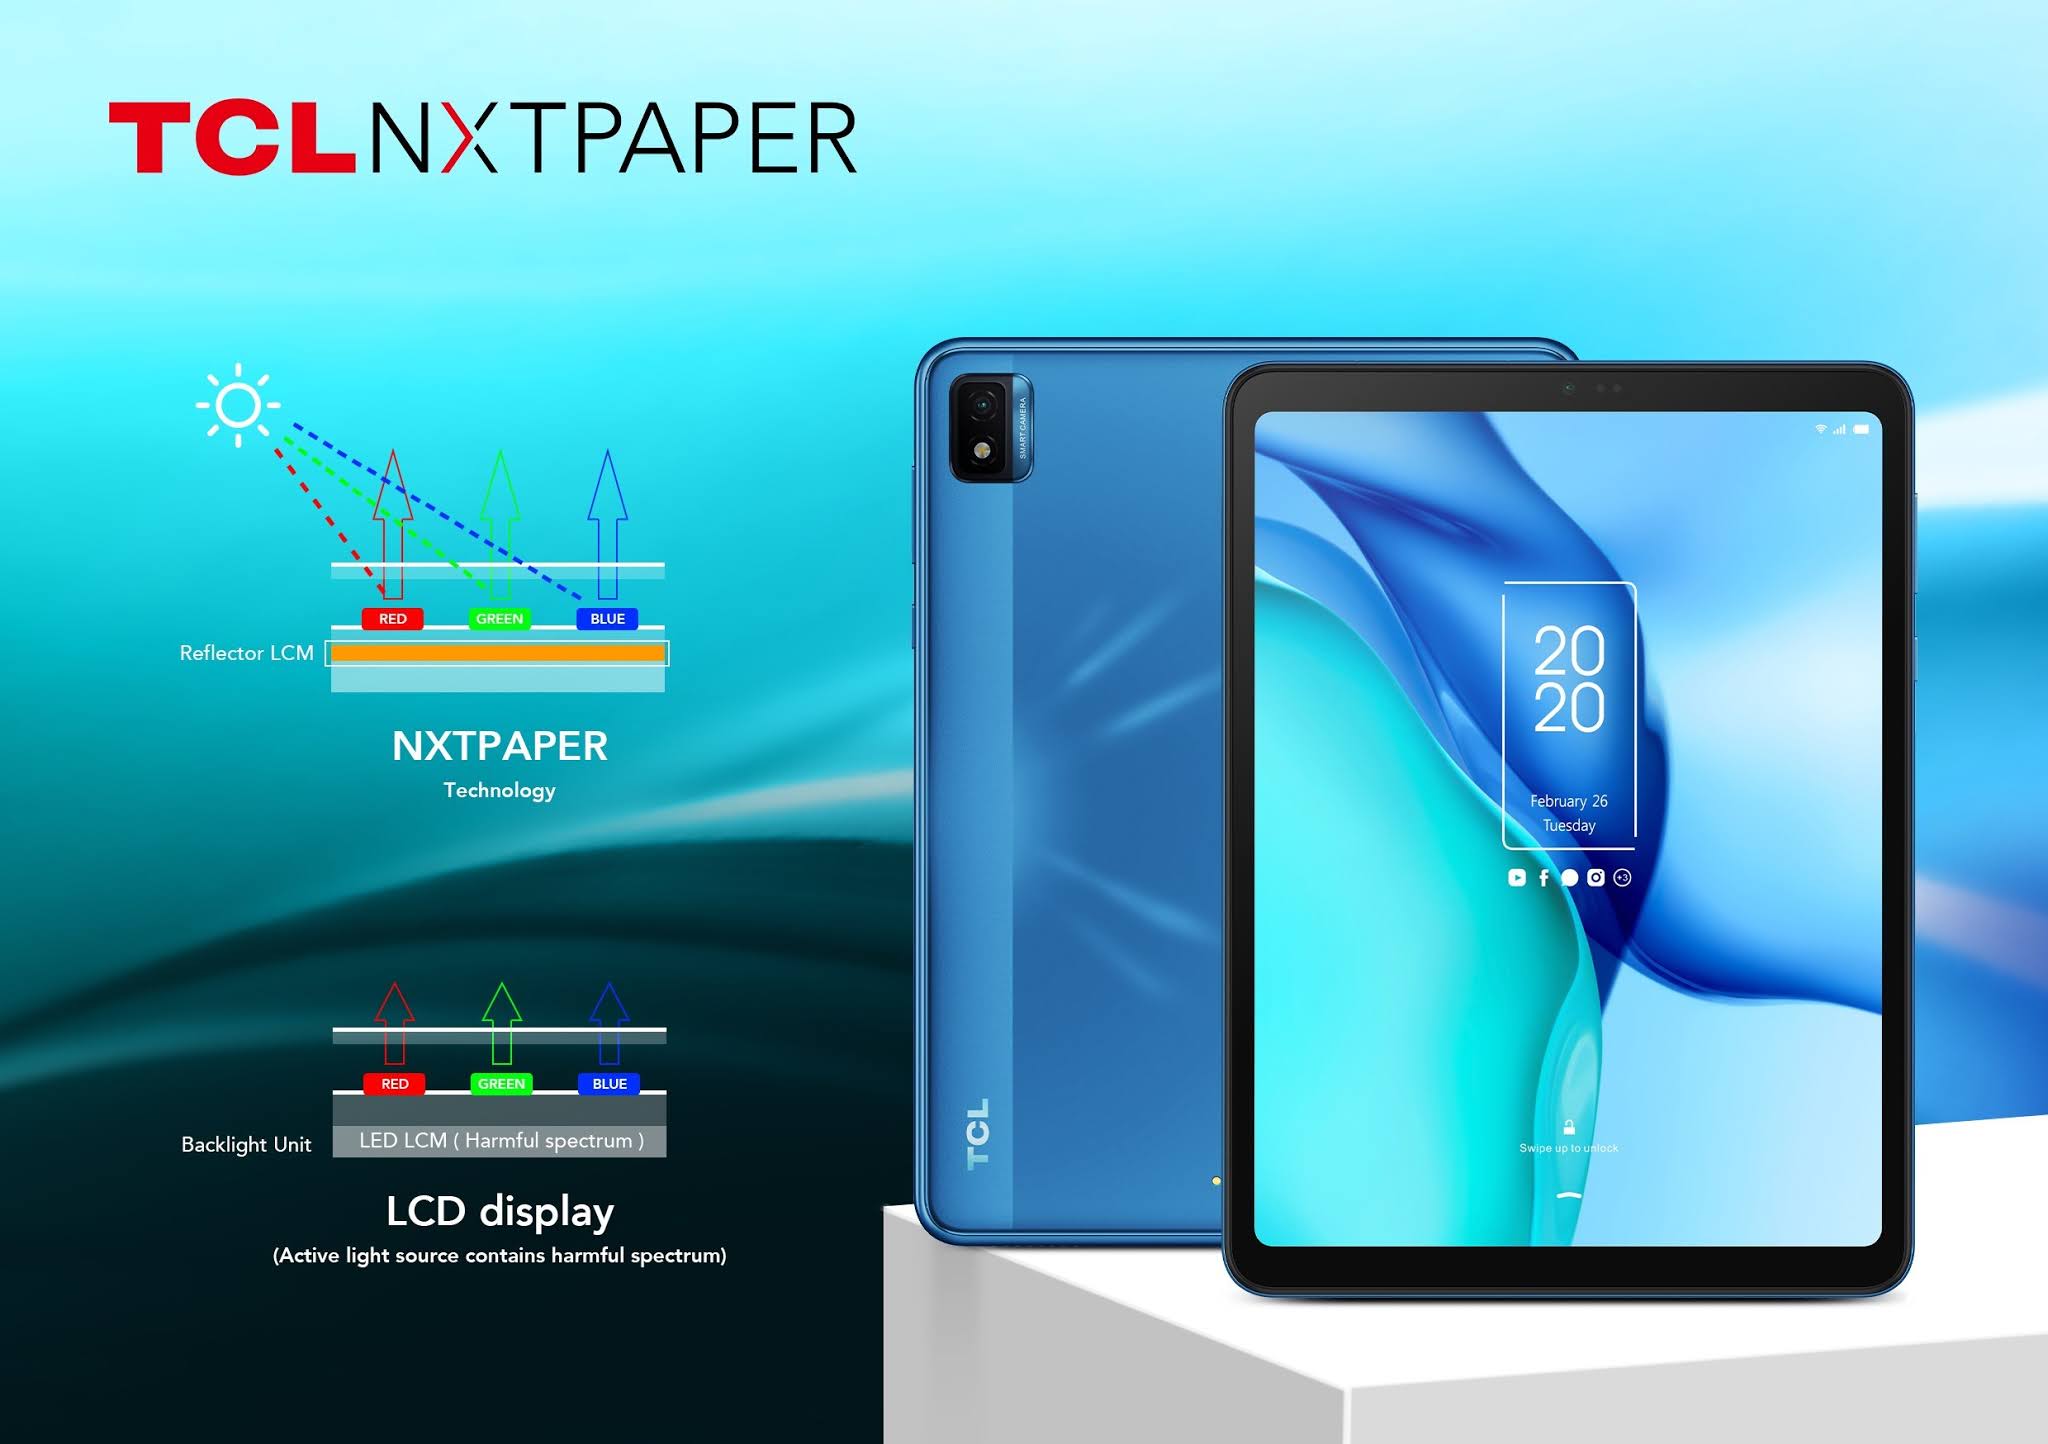 TCL's new NXTPAPER and TAB tablets deliver exceptional value in education and entertainment at CES 2021